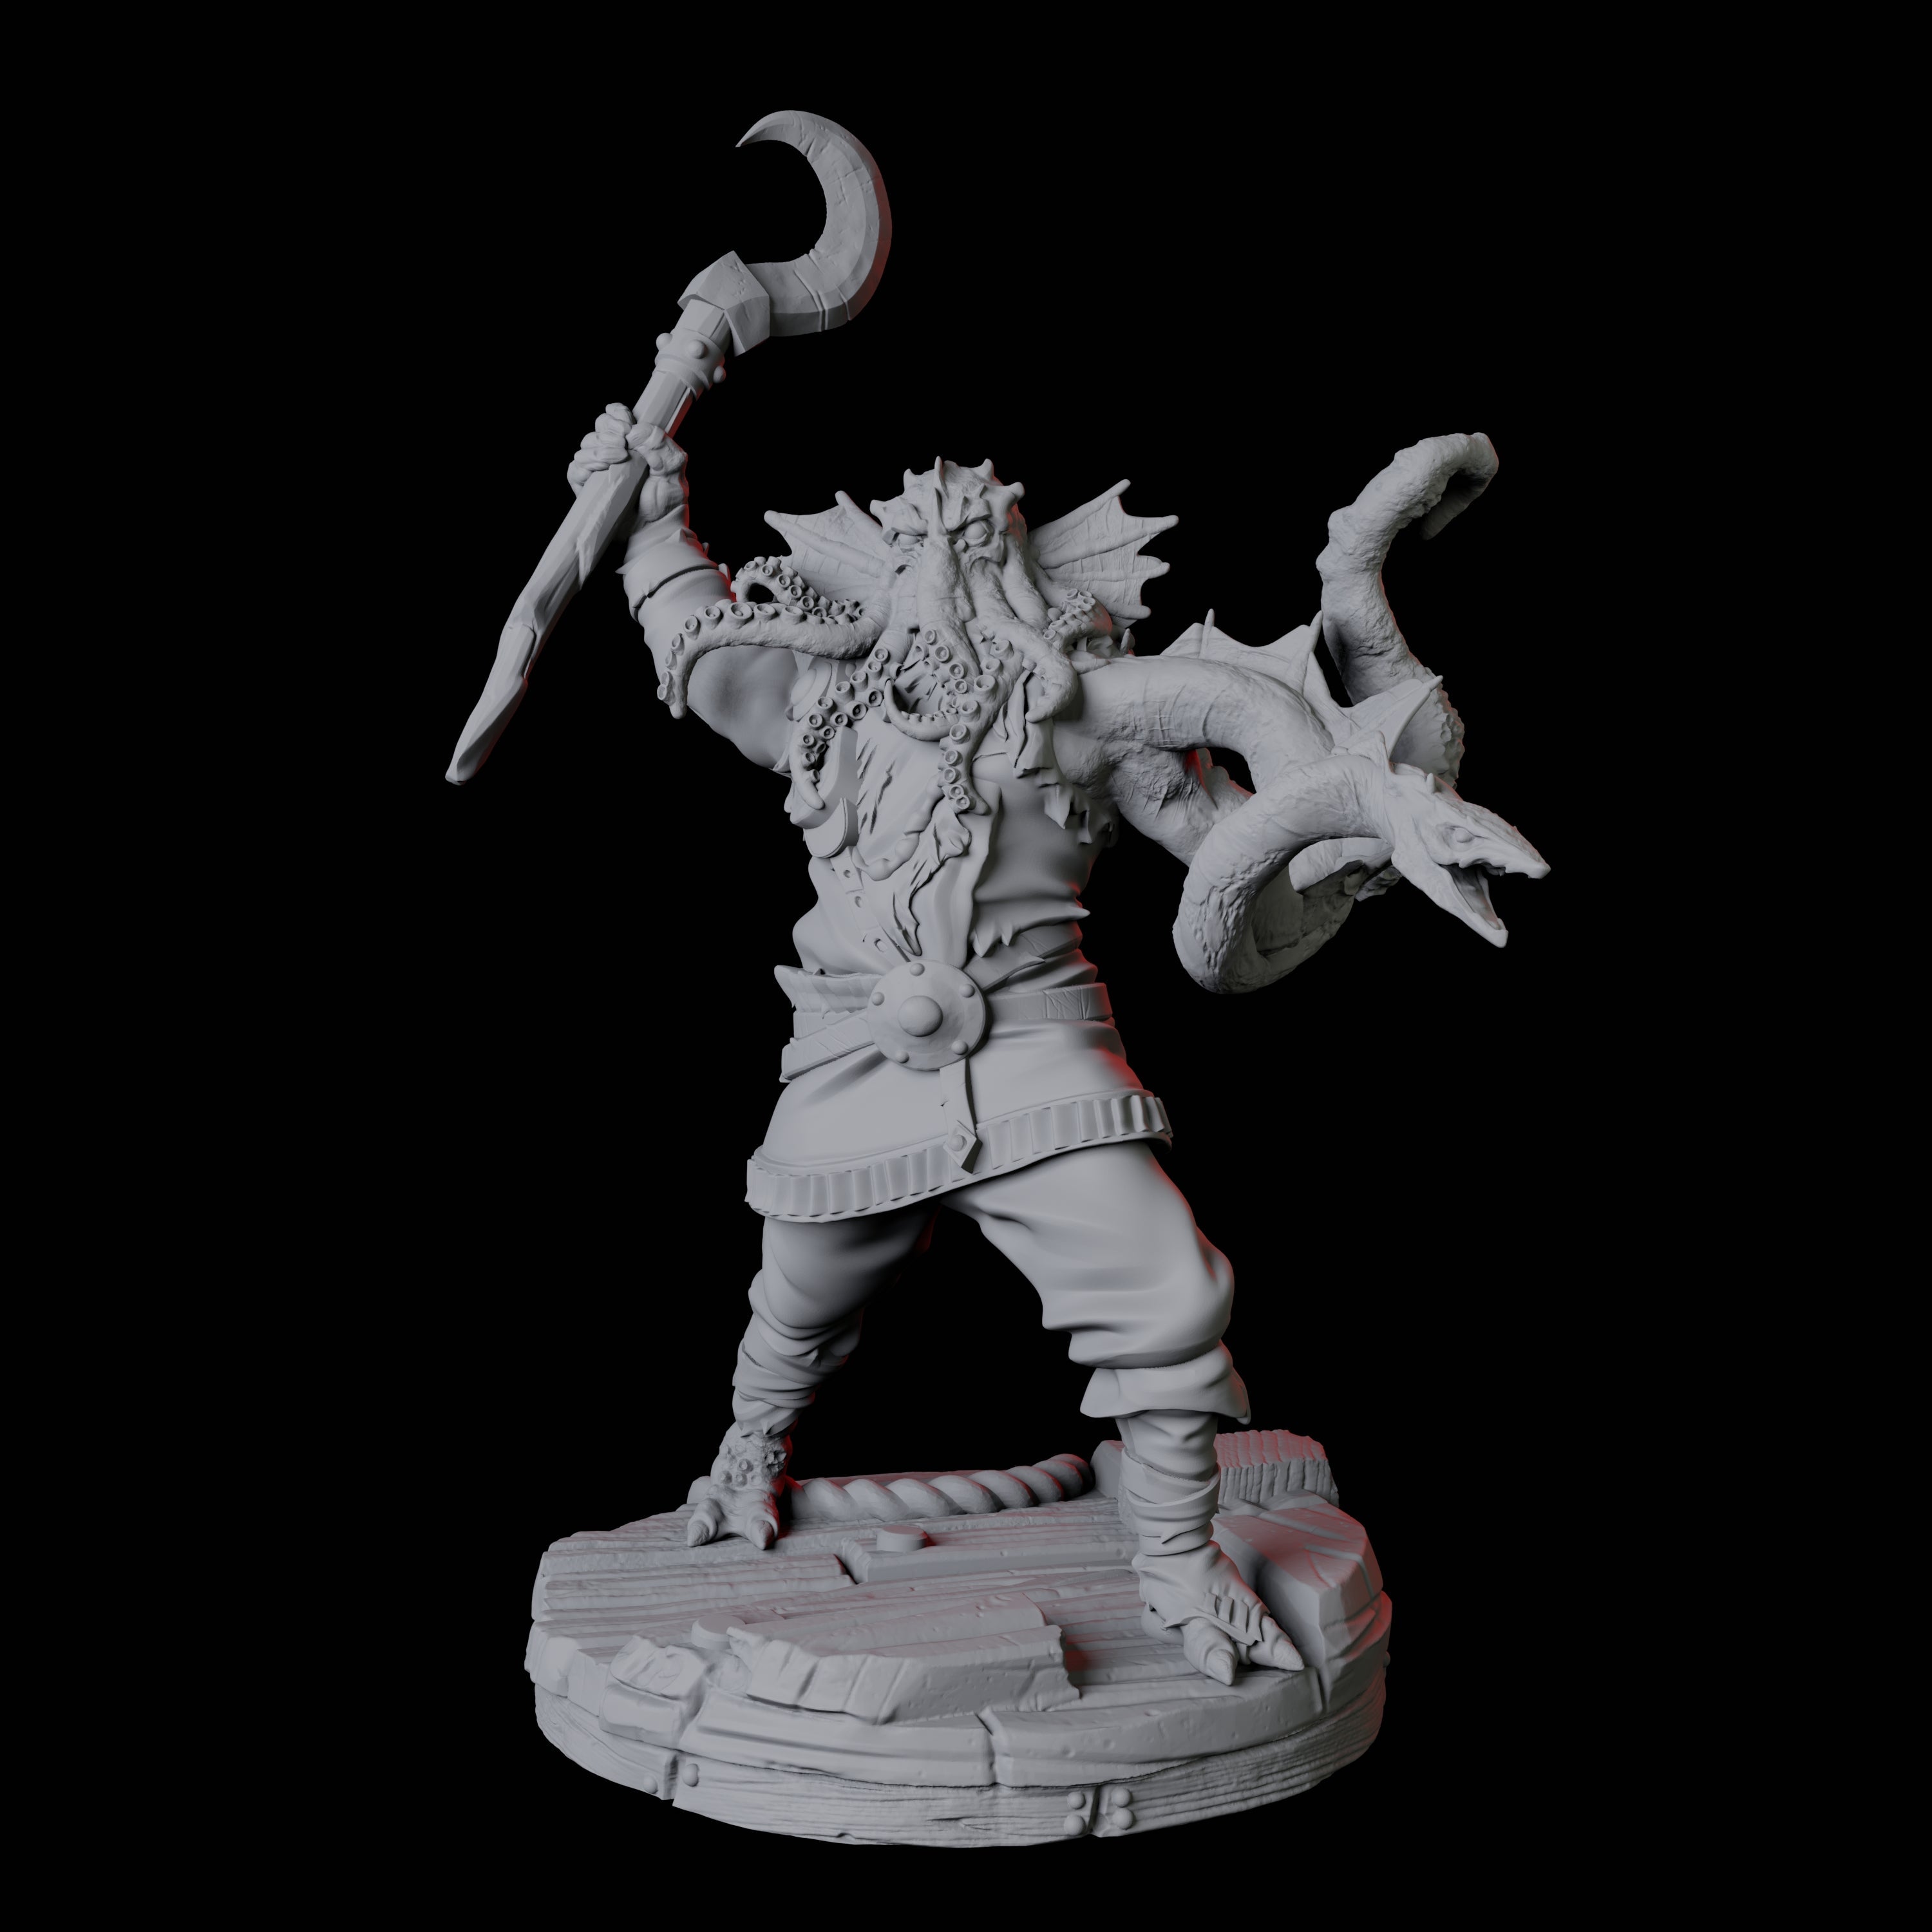 Sky Kraken Acolyte B Miniature for Dungeons and Dragons, Pathfinder or other TTRPGs